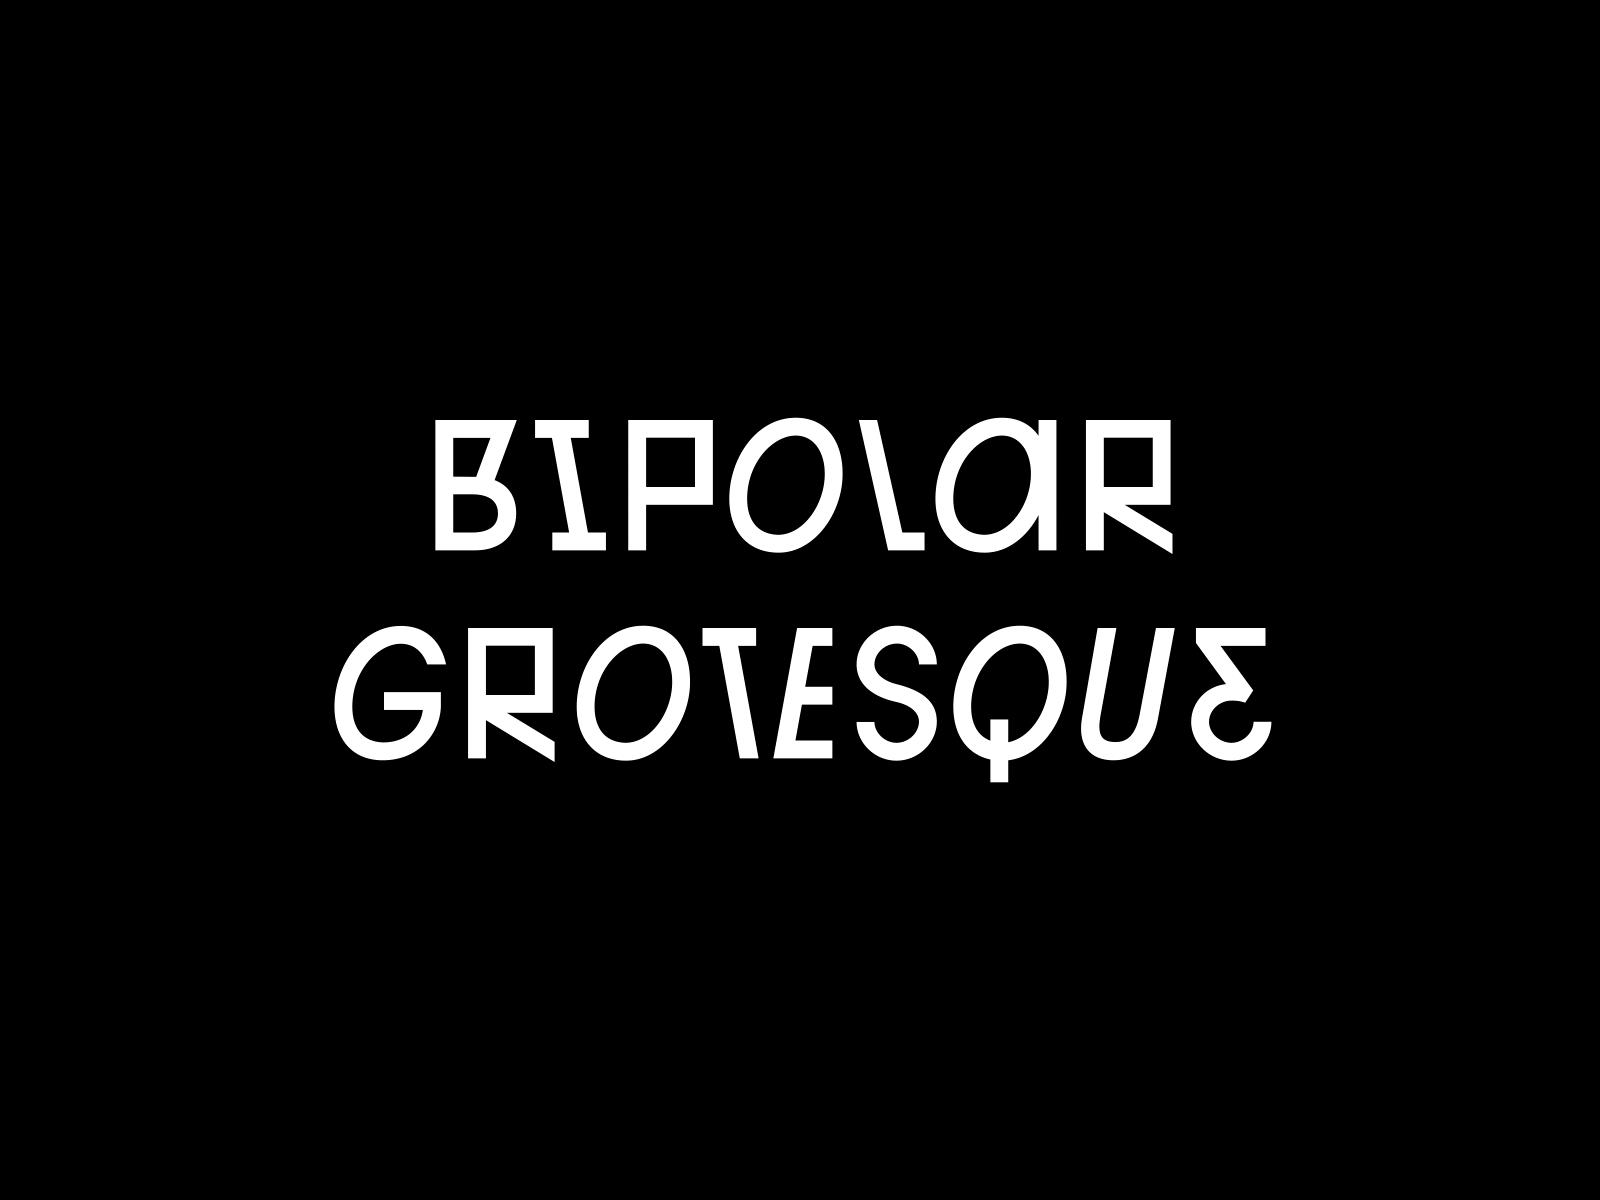 Bipolar Grotesque typeface agency best fonts font fontface studio trends 2023 type design type specialized typeface typography